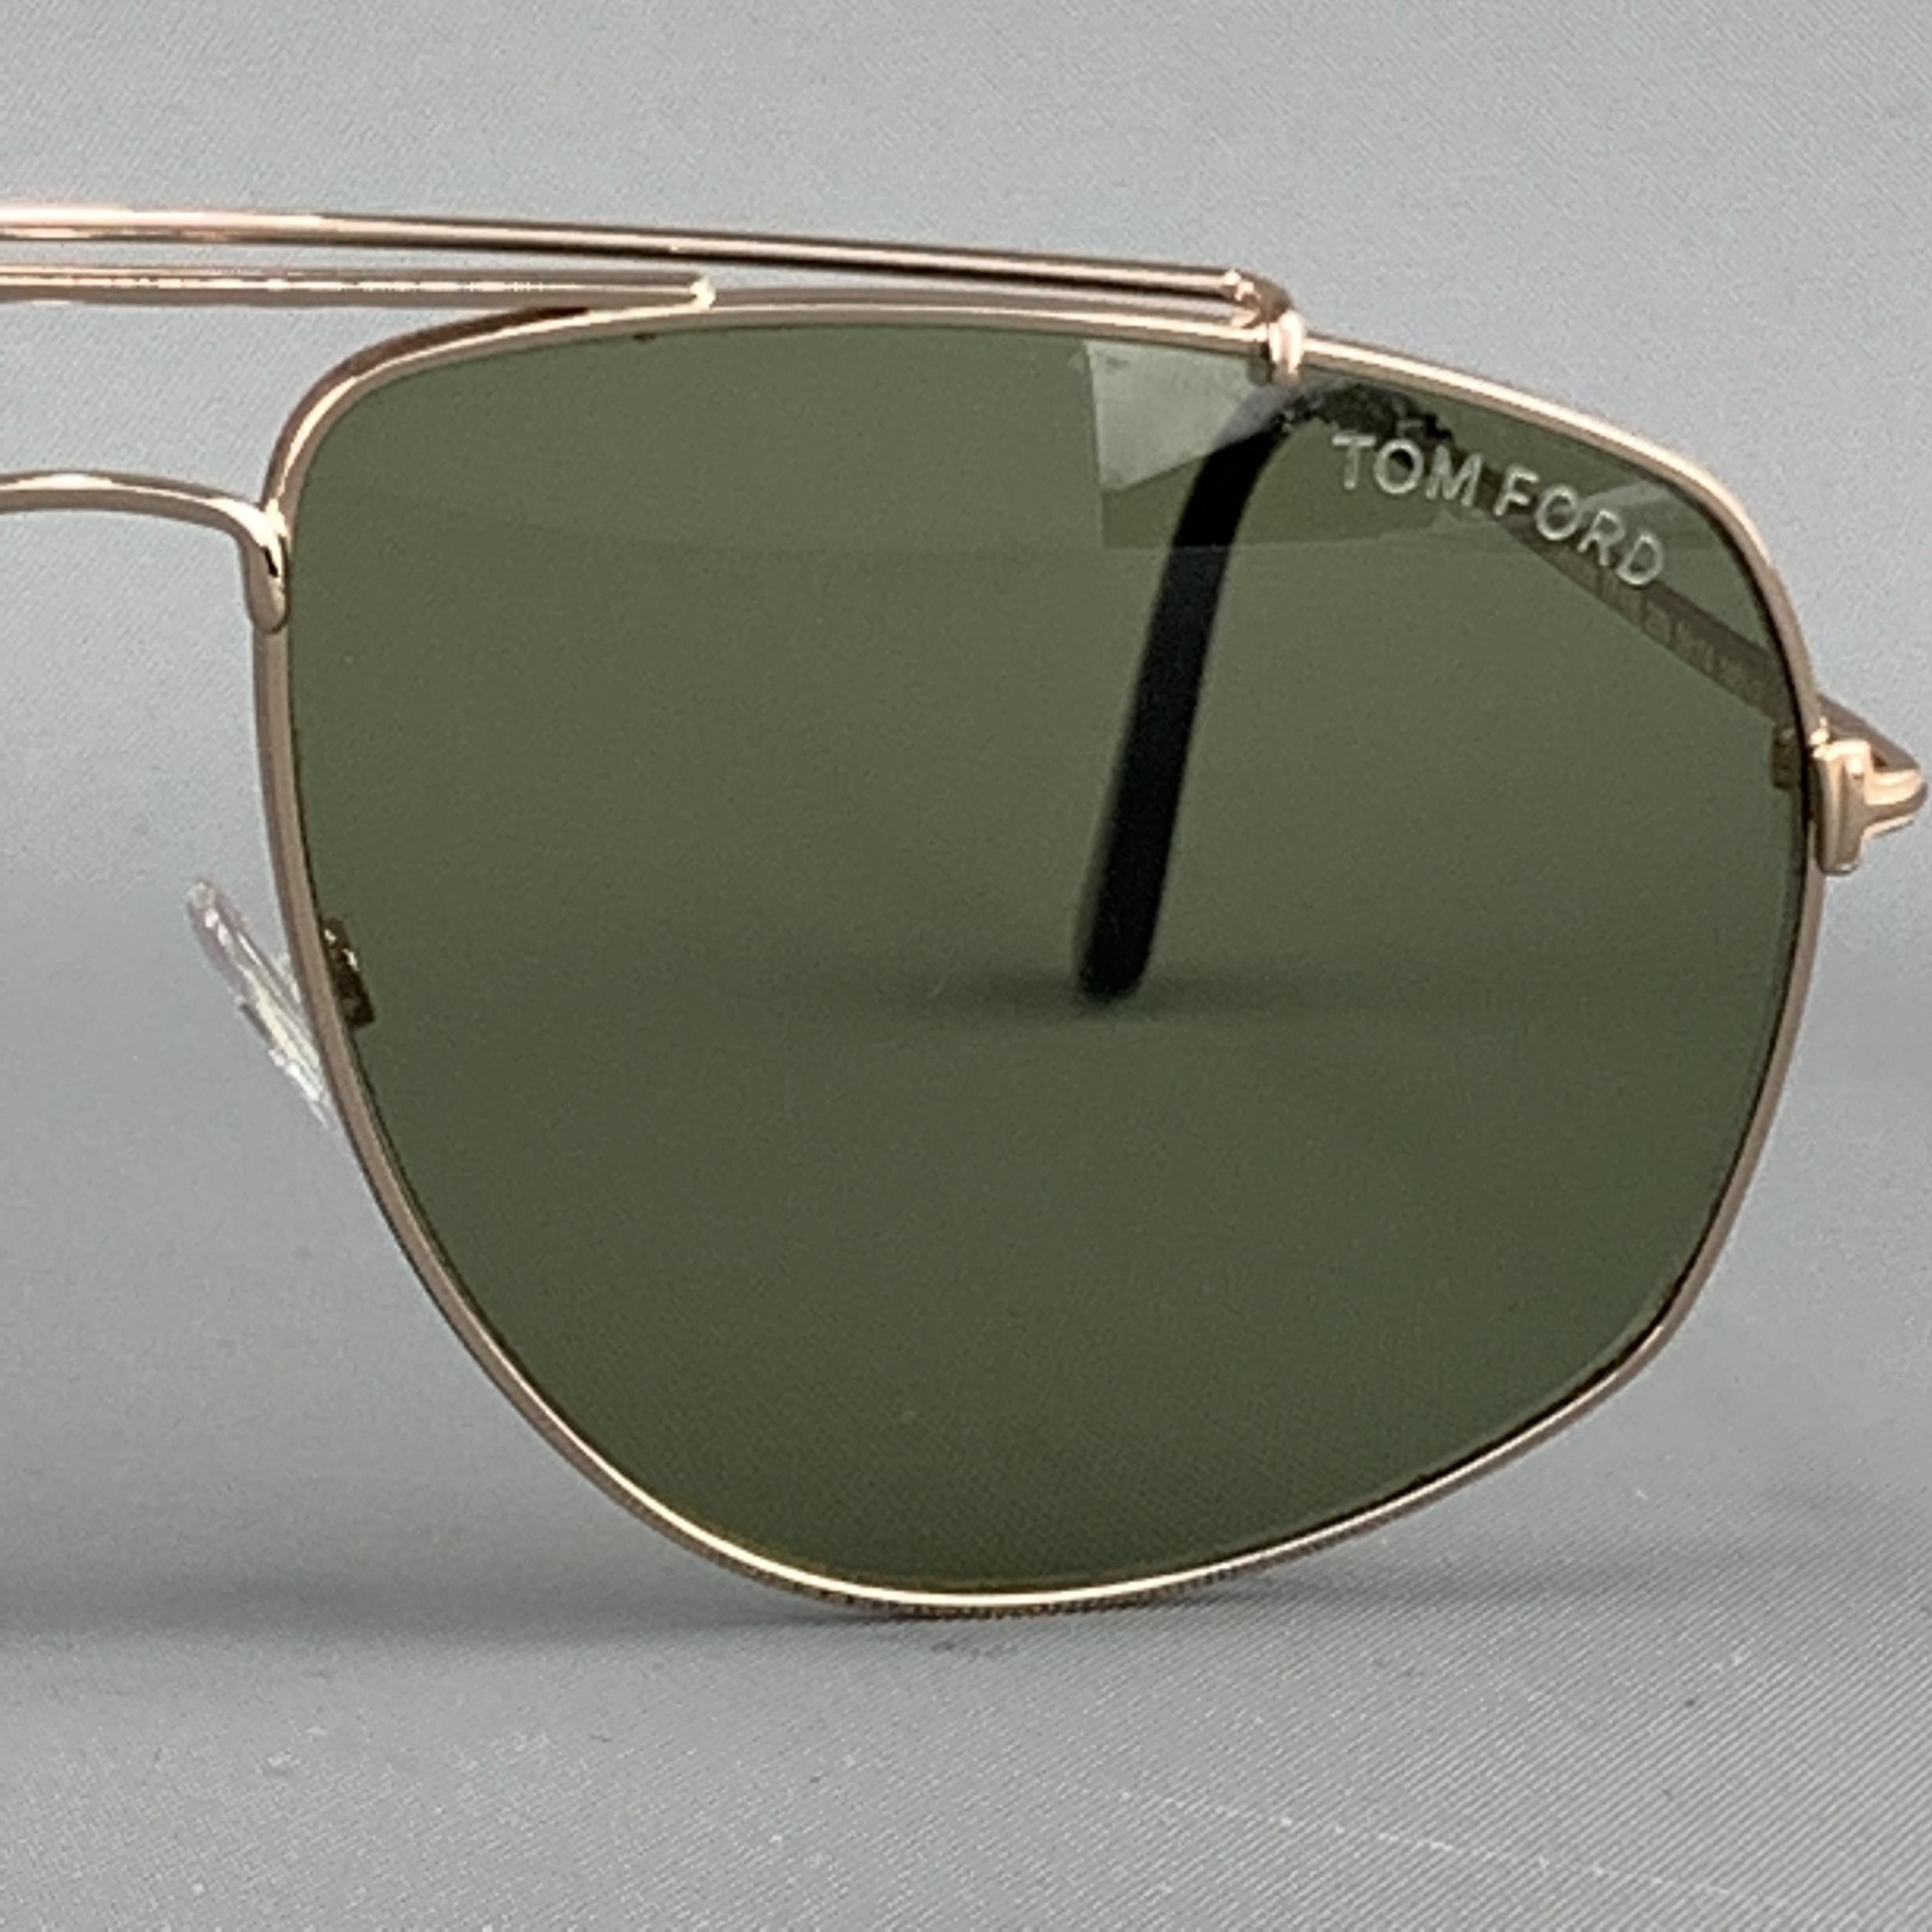 TOM FORD aviator sunglasses come in gold tone metal with green lenses. With case.  Made in Italy.

Very Good Pre-Owned Condition.
Marked: GEORGES TF 496 28 N 57 14 140 *2

Width: 13 cm.
Height: 5 cm.